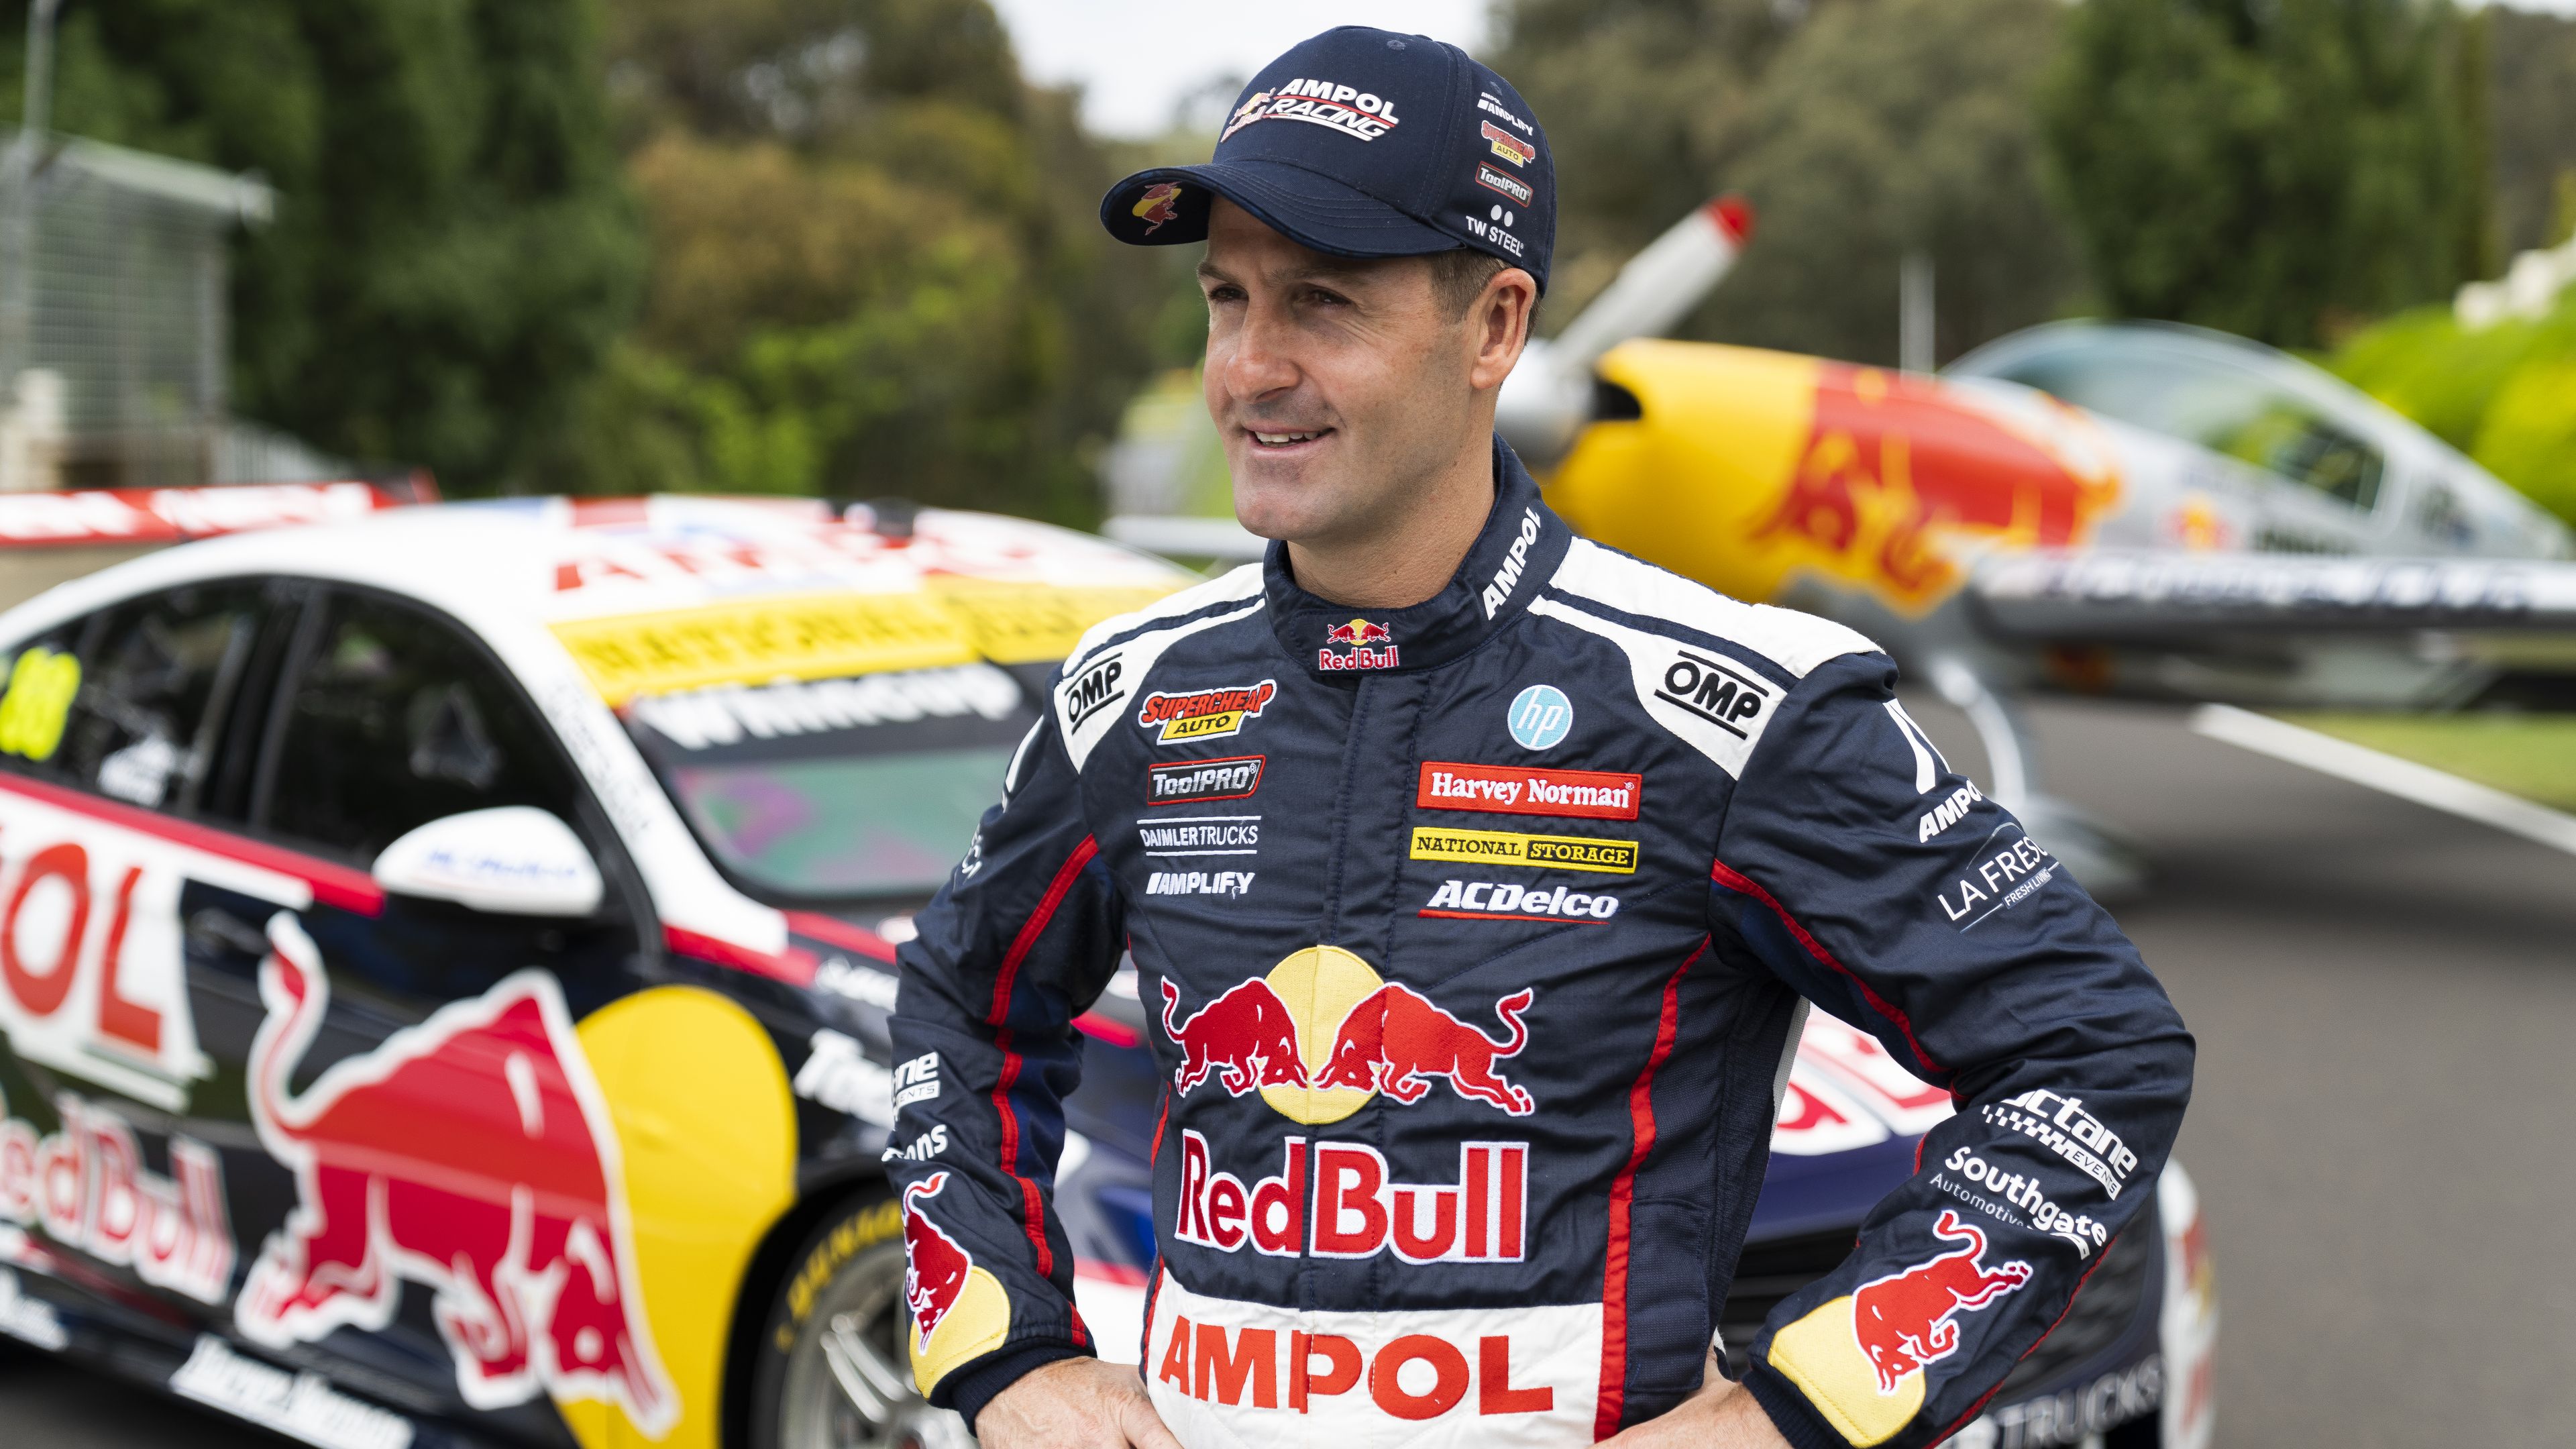 V8 Supercars champion Jamie Whincup reveals why he copped monster Larry Perkins spray